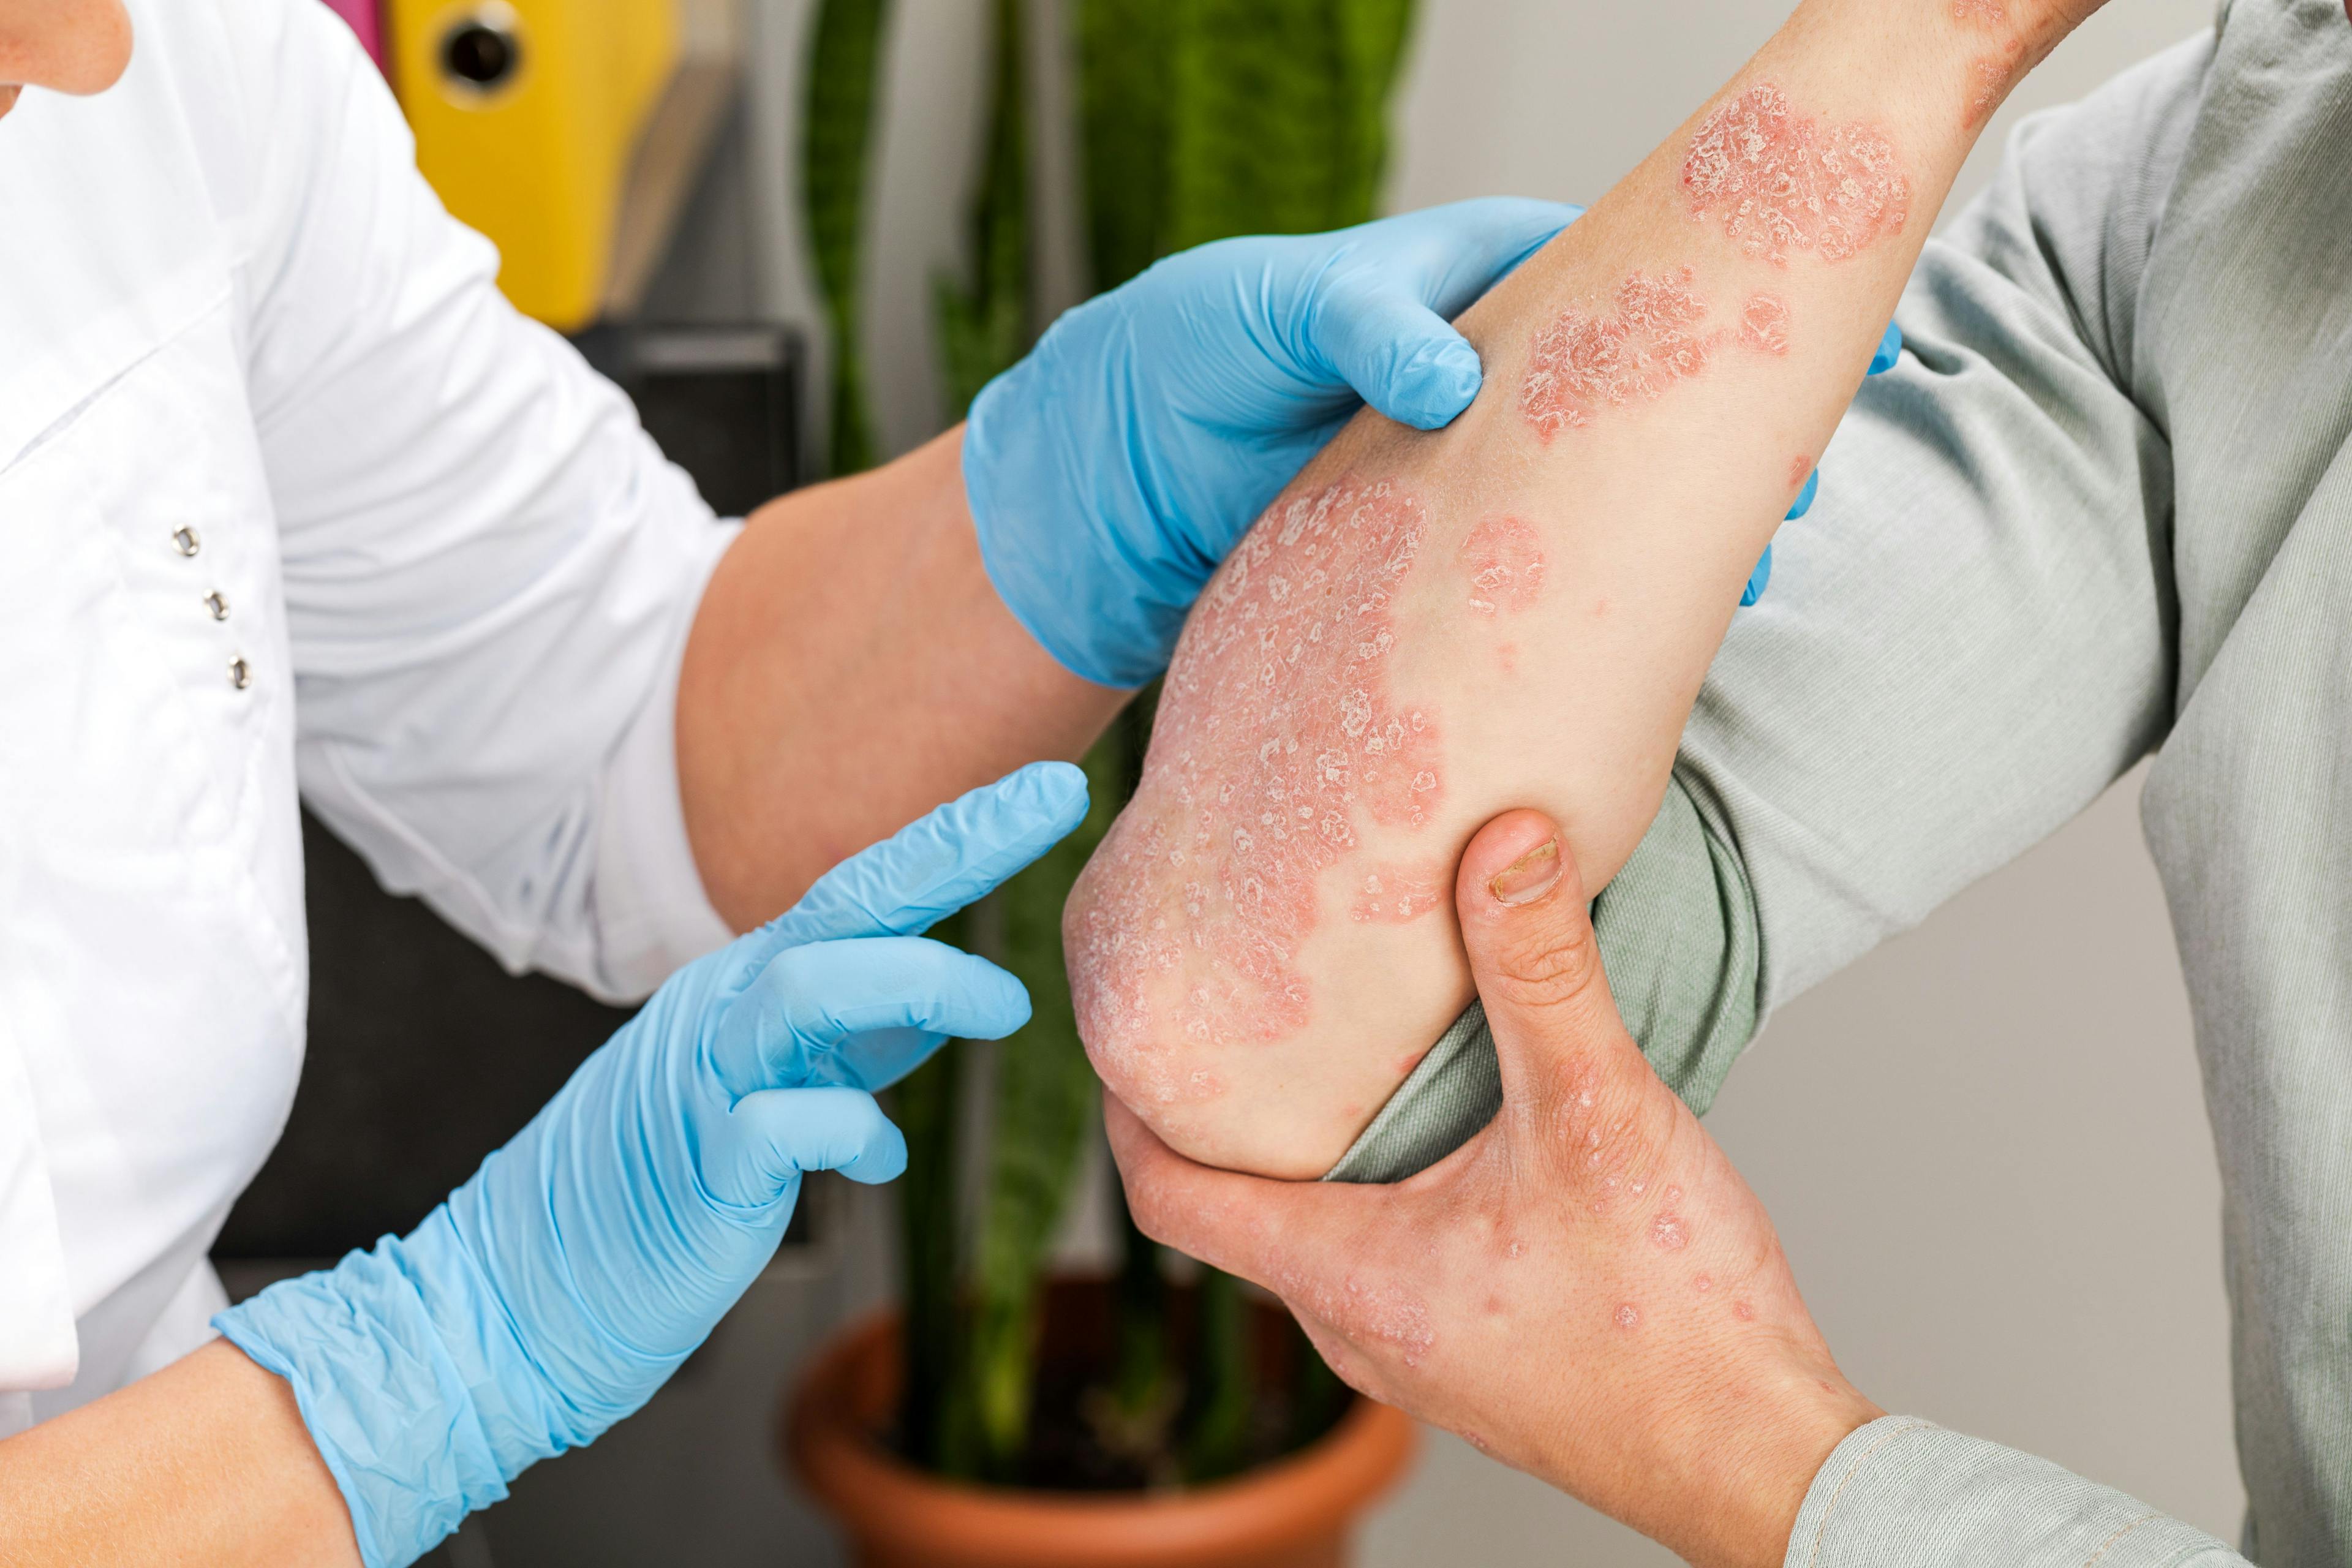 A dermatologist examines the skin of a patient with psoriasis | Image credit: © fusssergei - stock.adobe.com